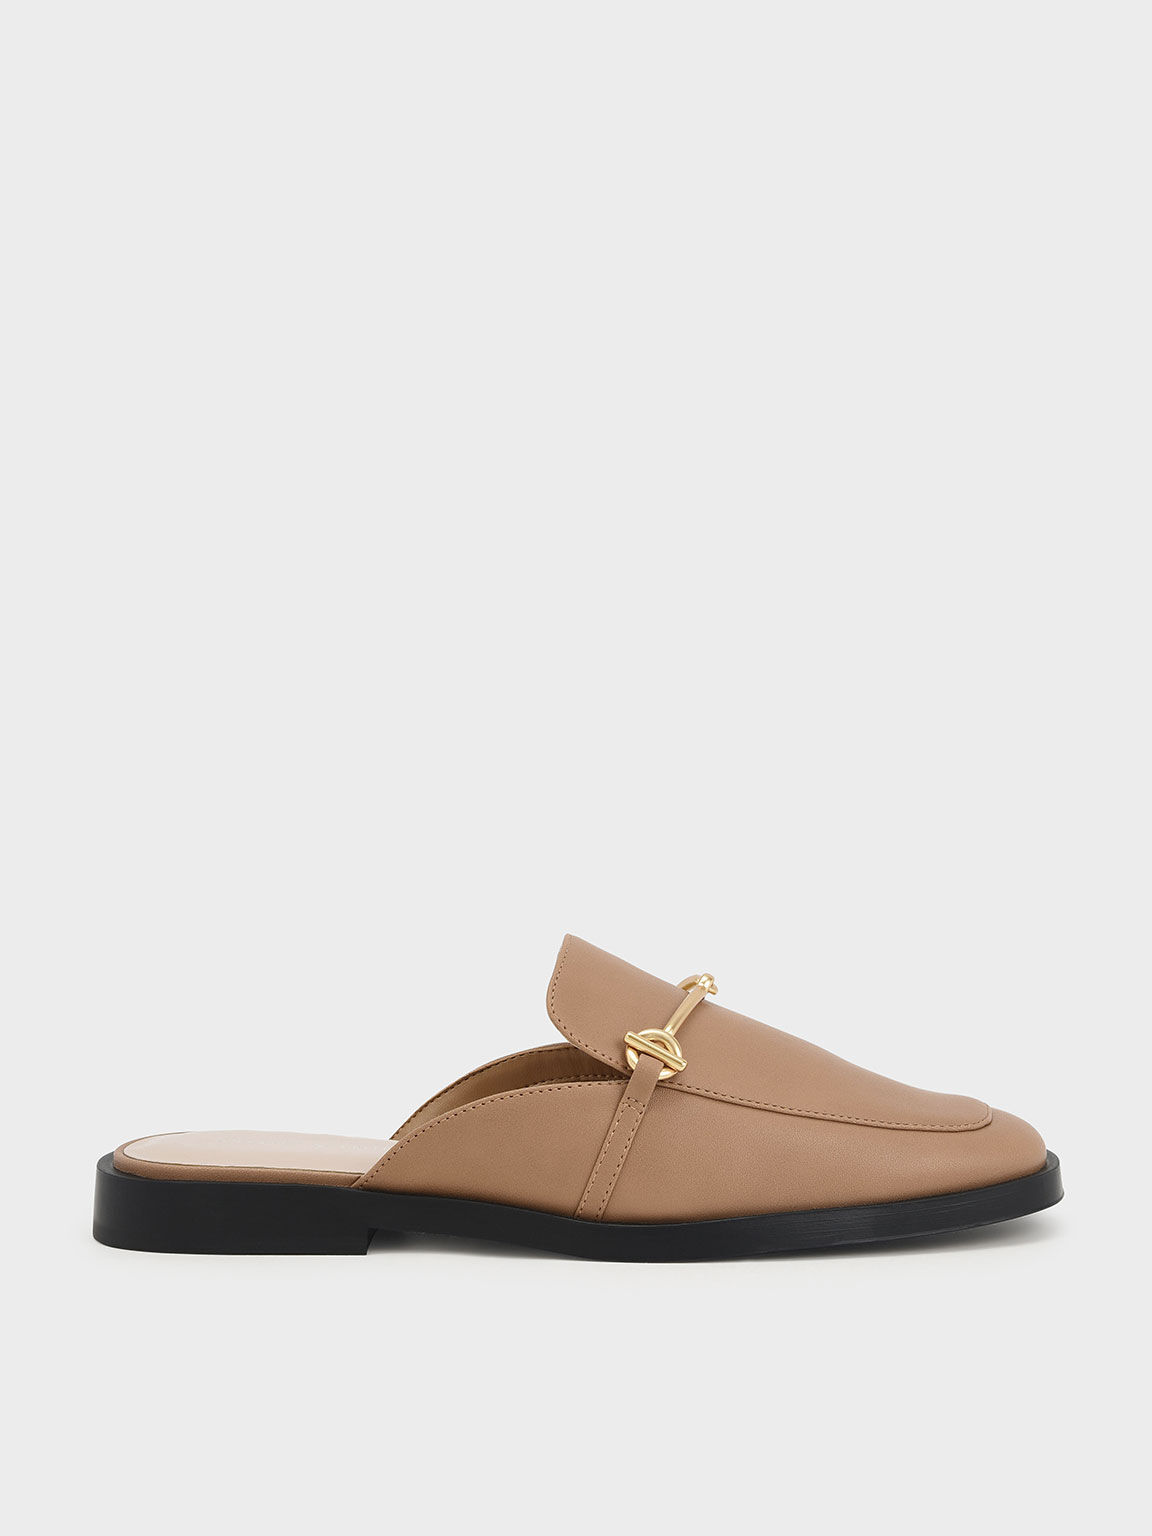 Metallic Accent Loafer Mules, Camel, hi-res